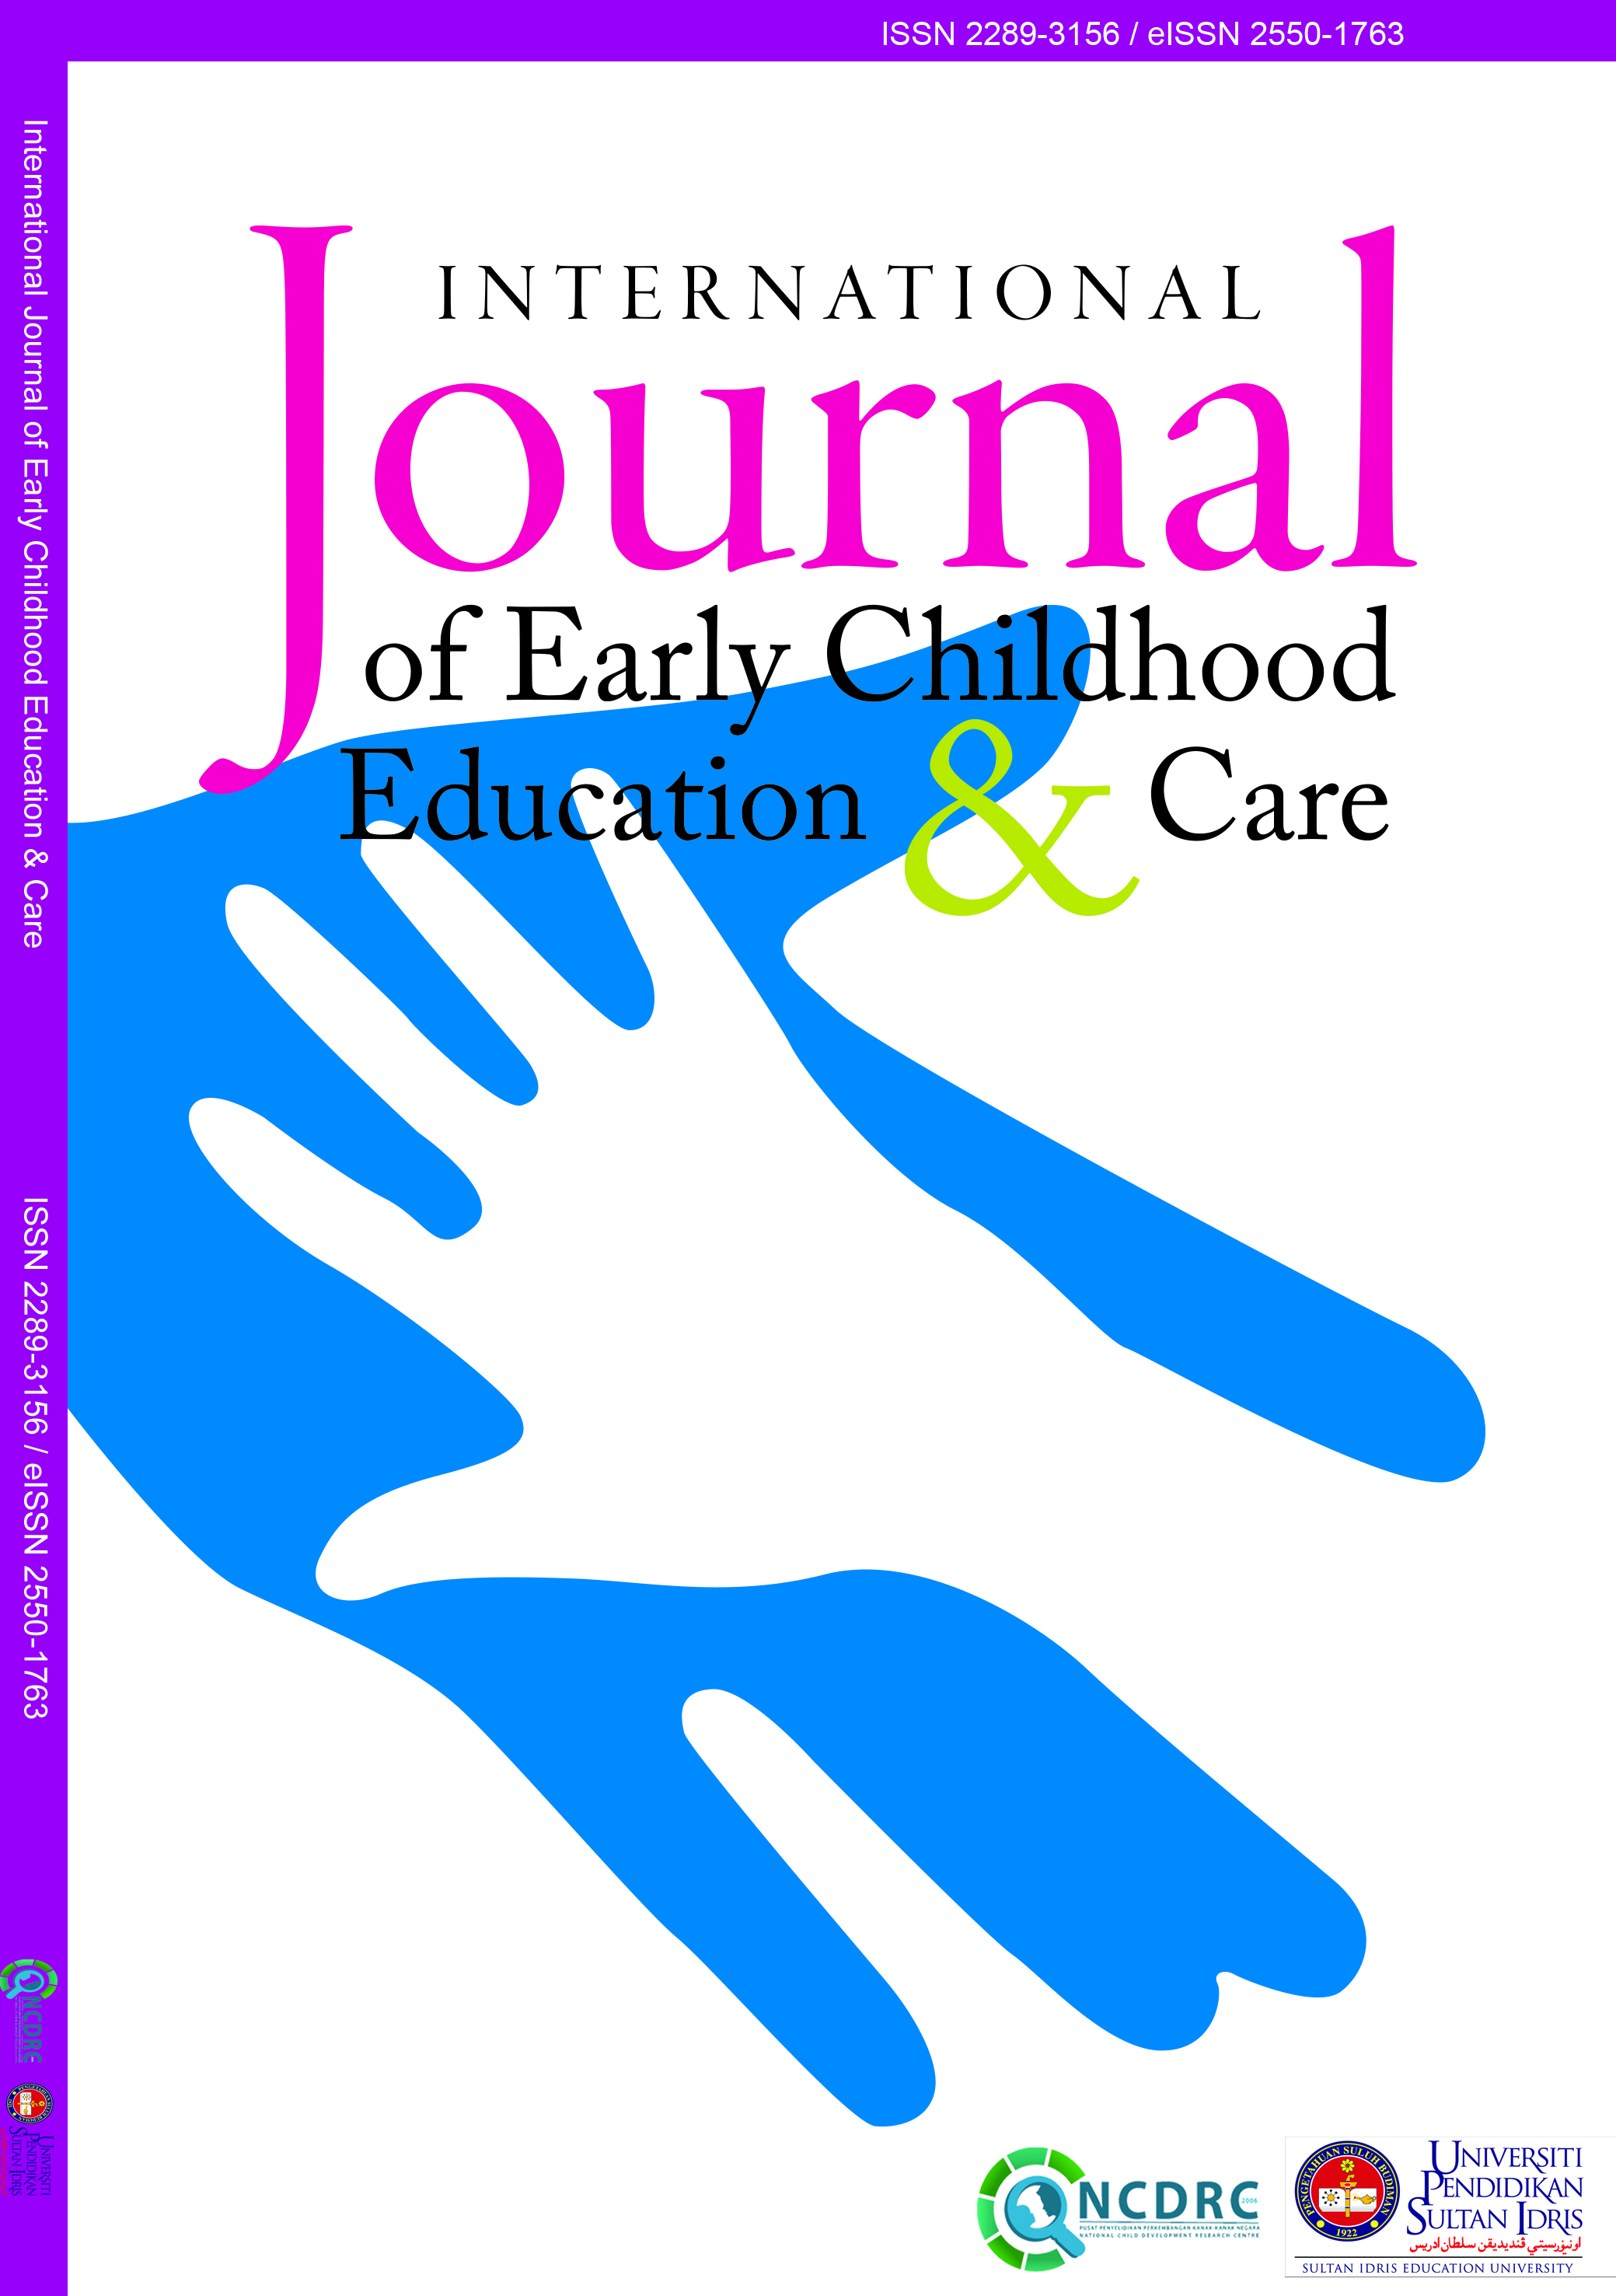 					View Vol. 6 (2017): International Journal of Early Childhood Education and Care
				